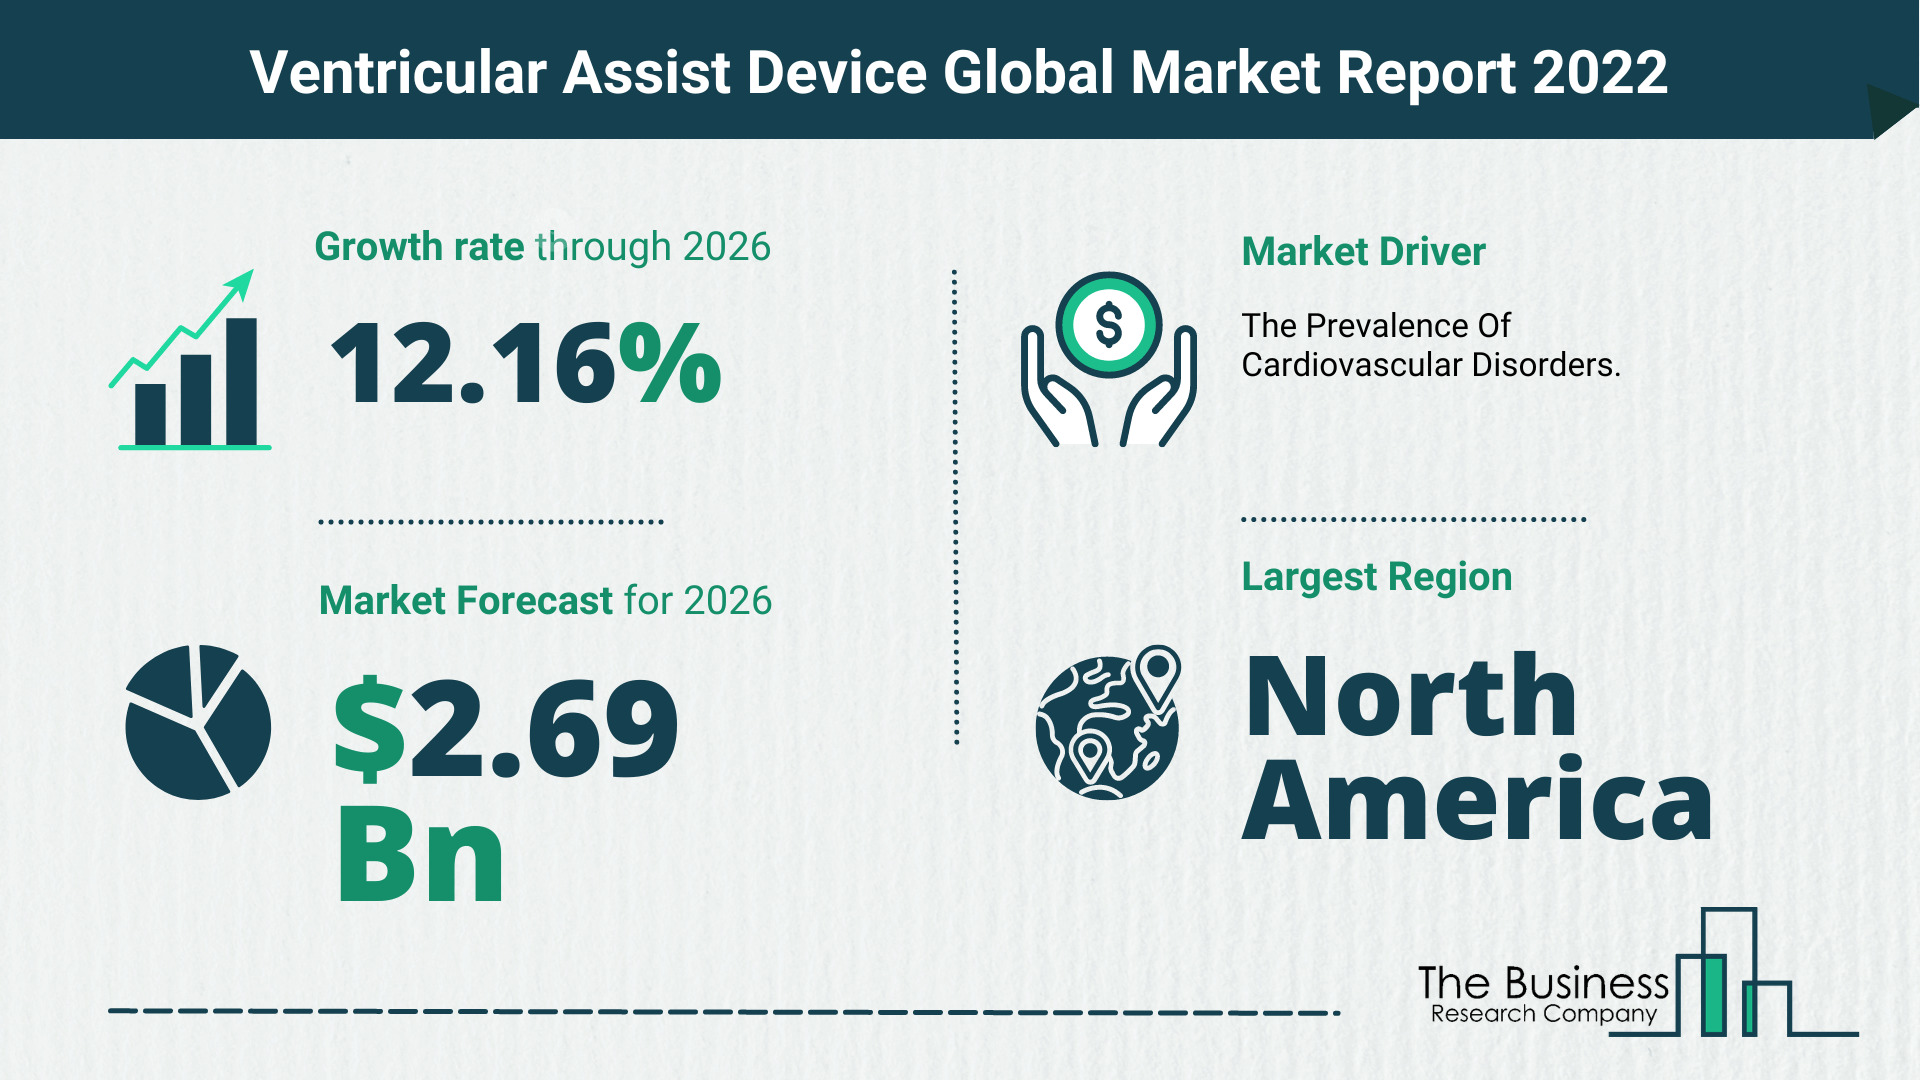 How Will The Ventricular Assist Device Market Grow In 2022?